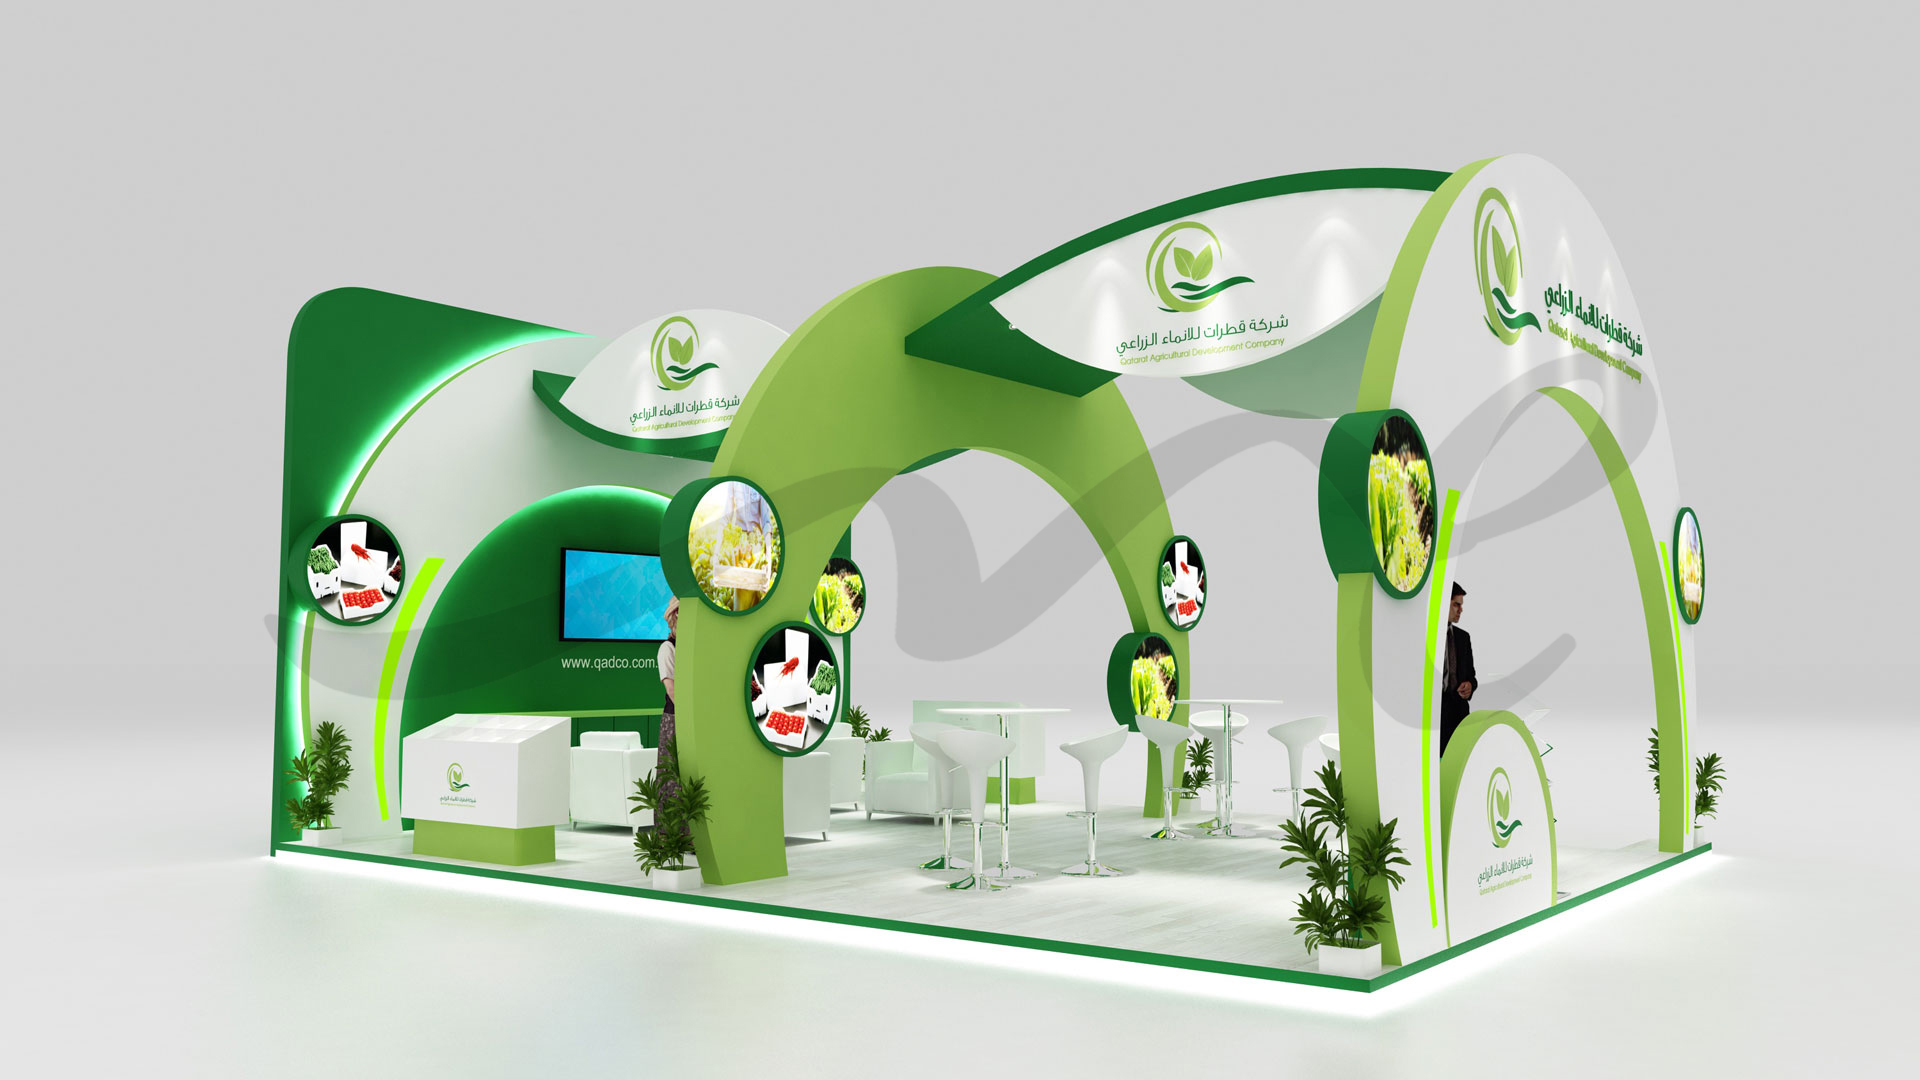 3D Design of QADCO Stand for Agriteq 2019 by ME Visual